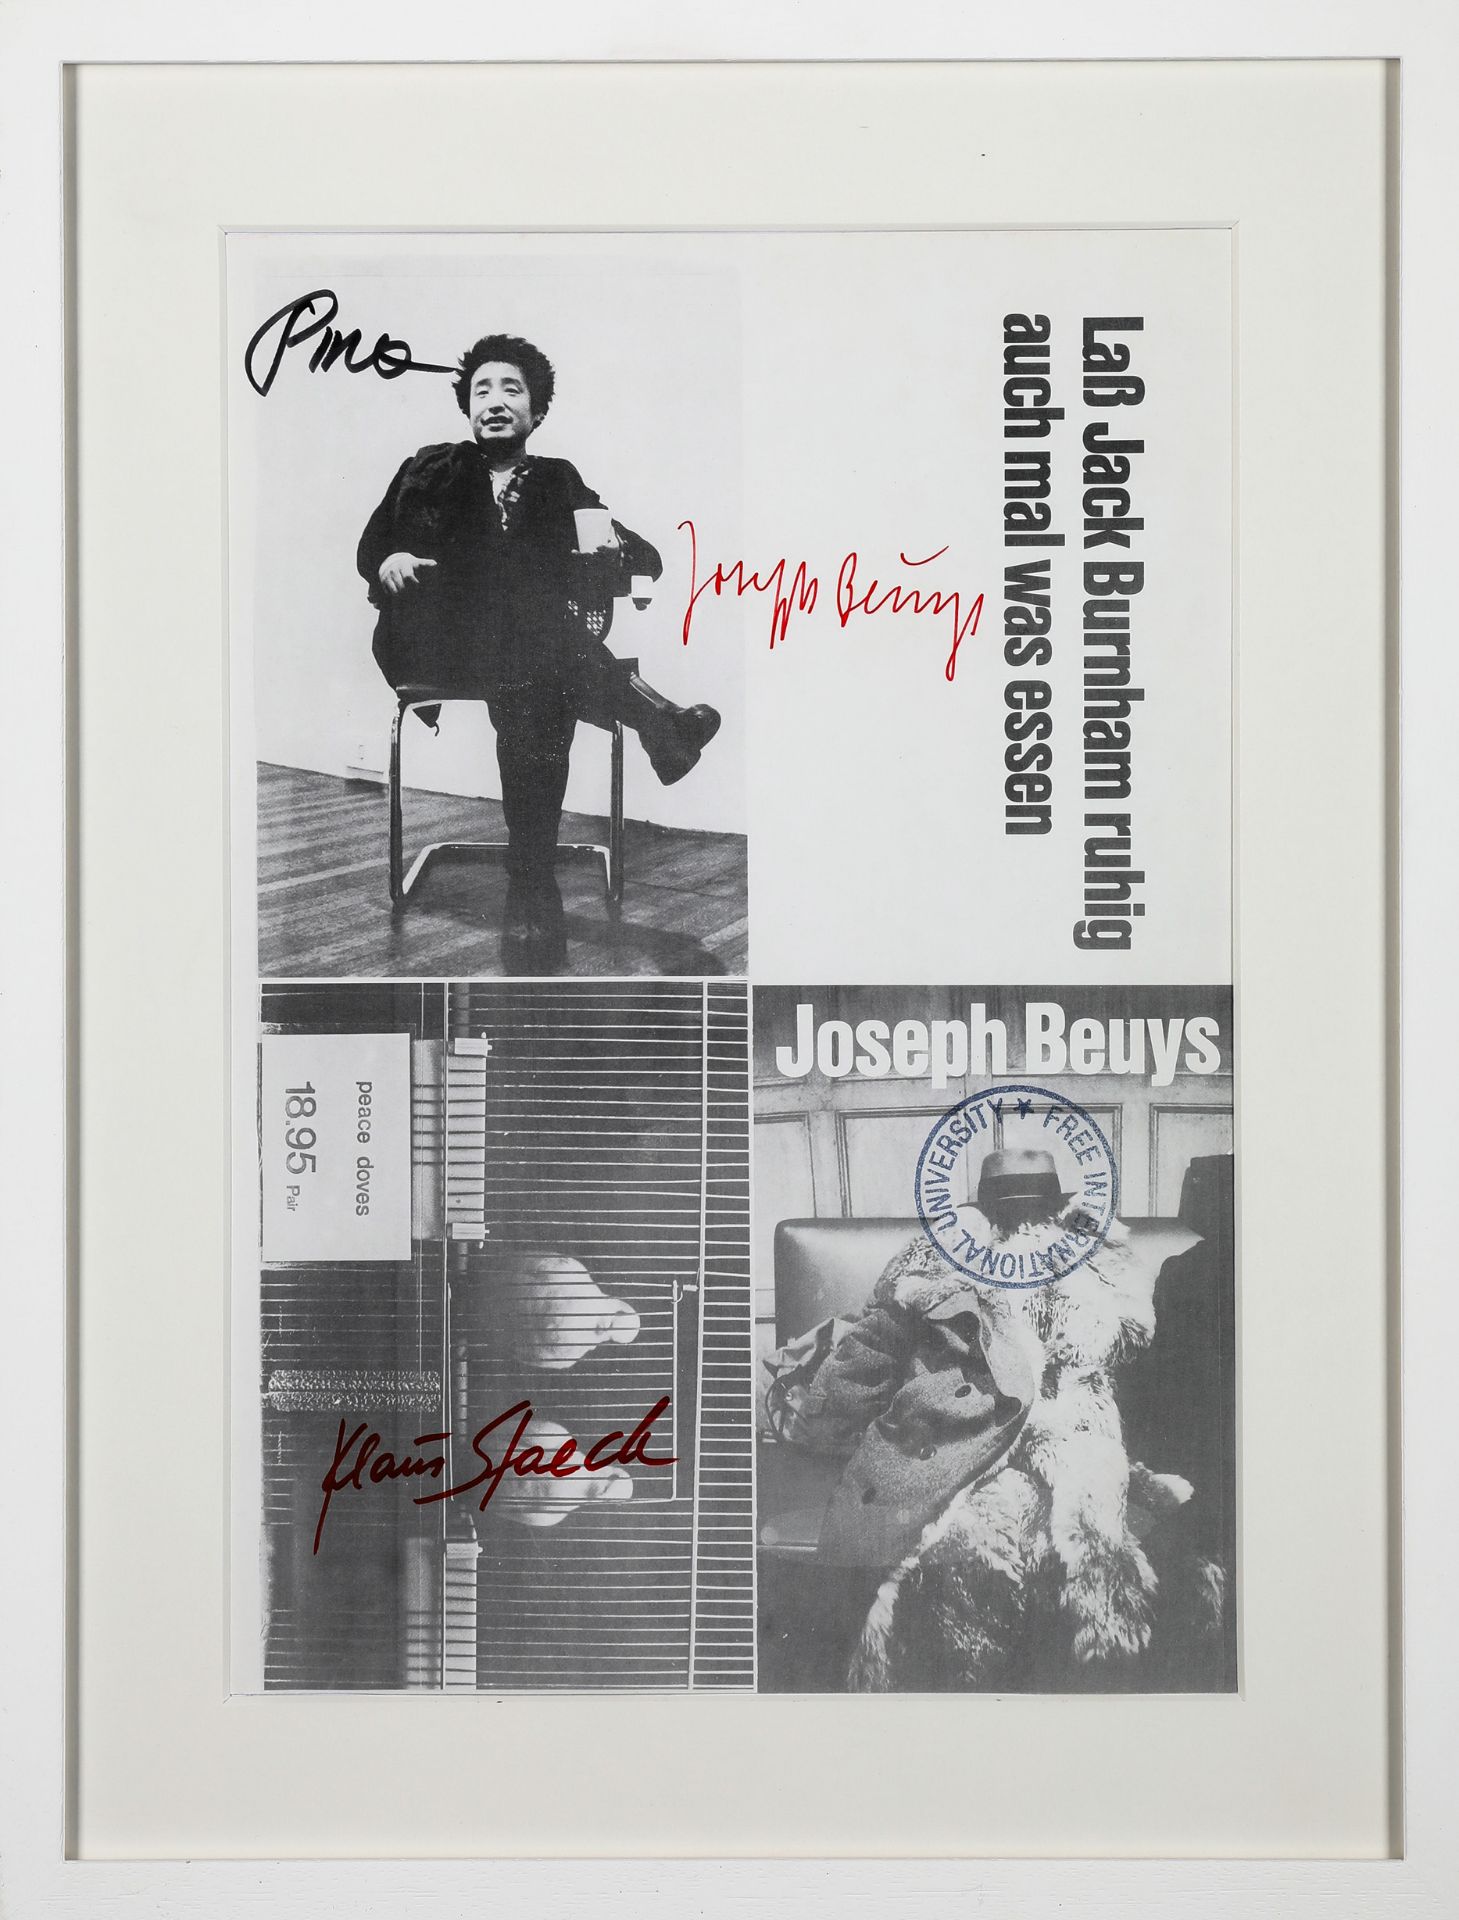 Joseph Beuys*, Klaus Staeck, Nam June Paik, signed proof for postcards, 1974 - Image 2 of 5